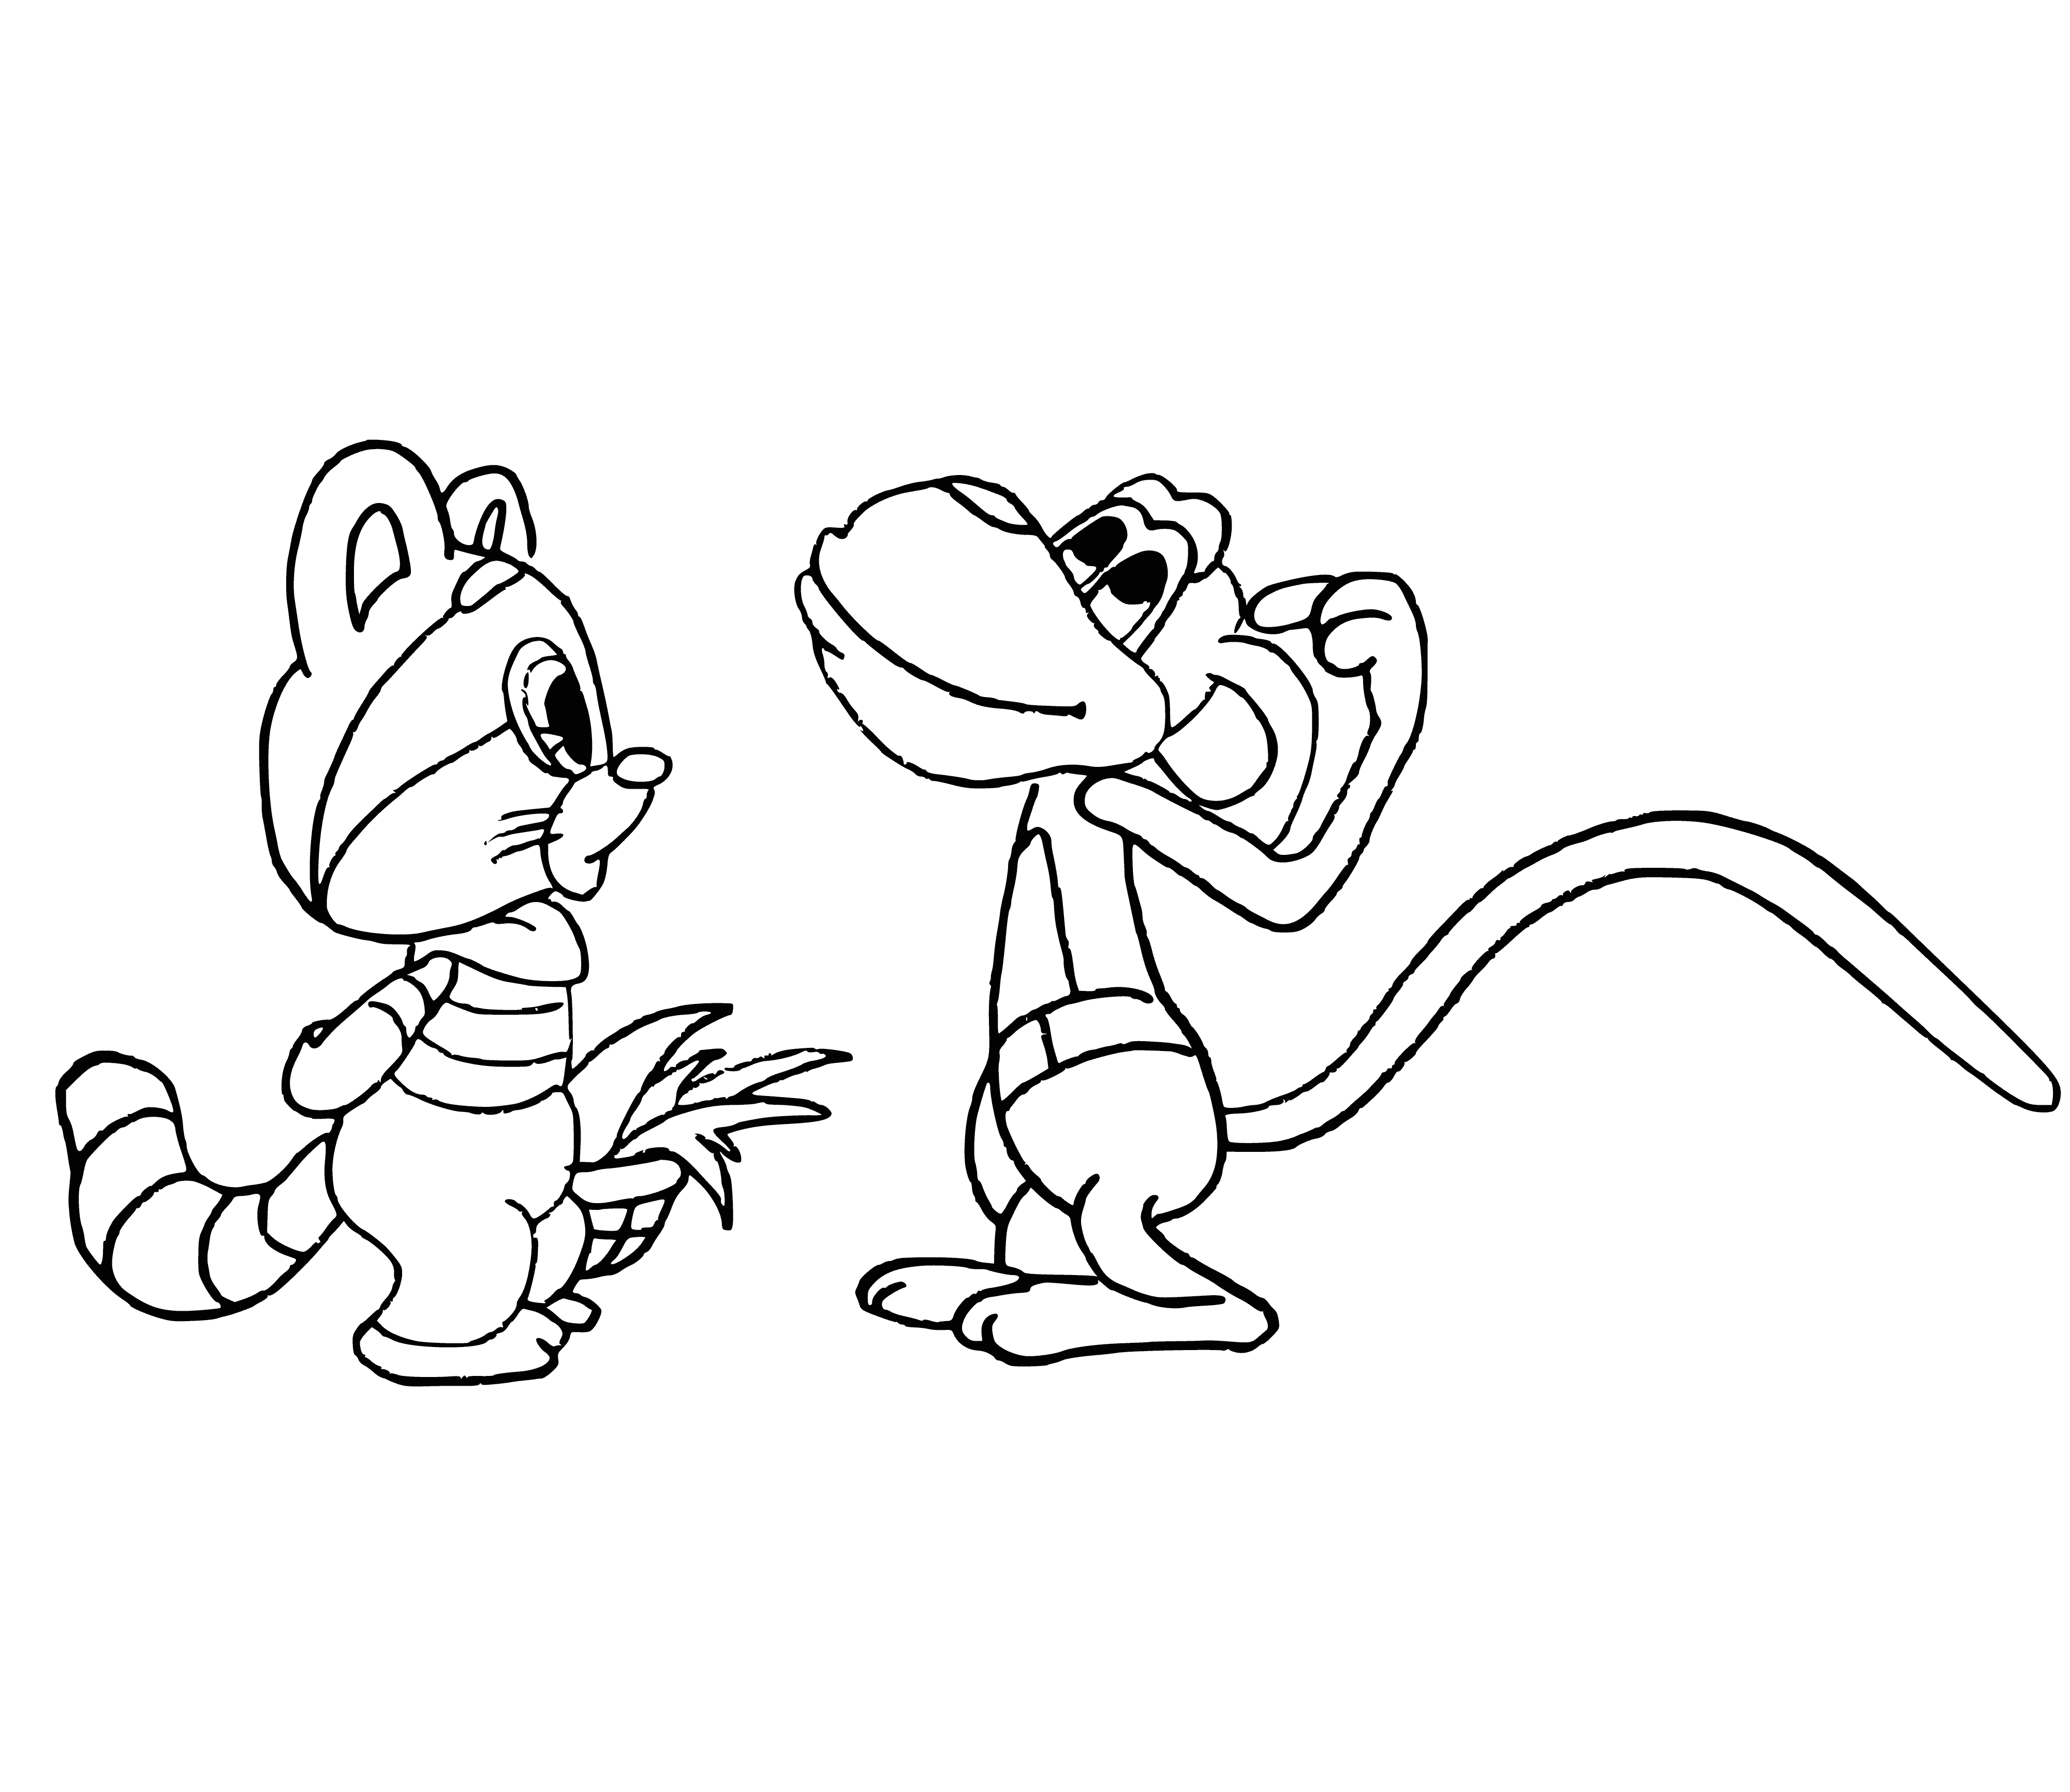 coloring page: Raccoon tries to break into monkey cage, but monkey is watching. Raccoon has its paw on the lock.